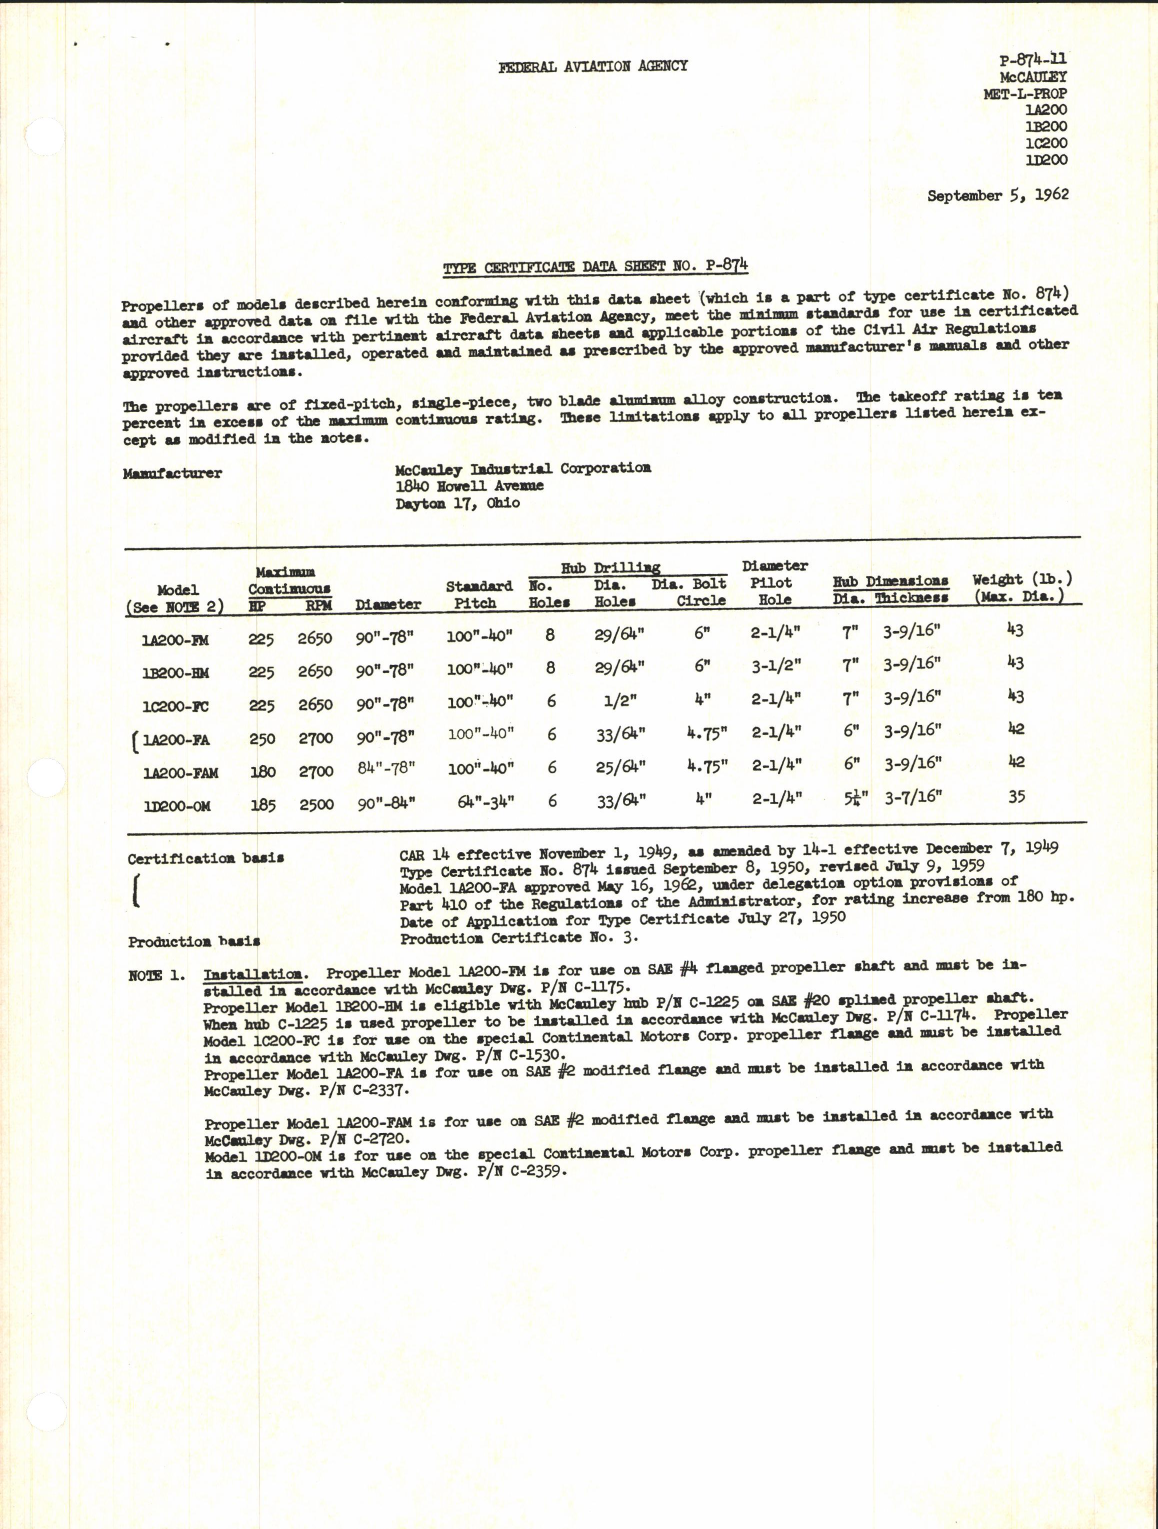 Sample page 1 from AirCorps Library document: 1A200, 1B200, 1C200, and 1D200 - Type Certificate